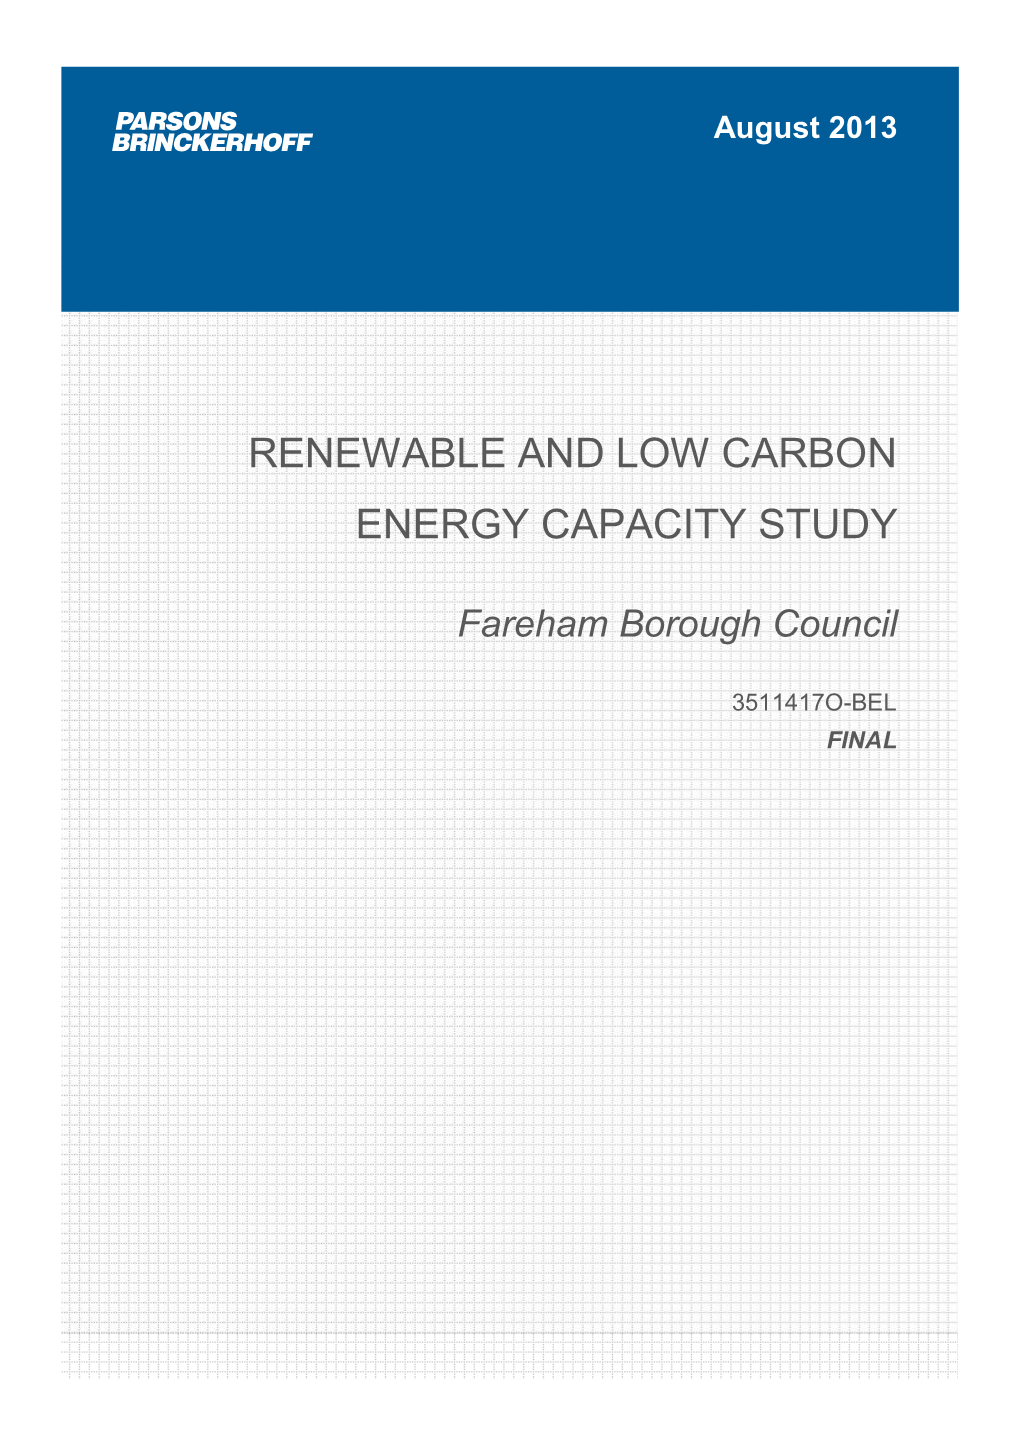 Renewable and Low Carbon Energy Capacity Study